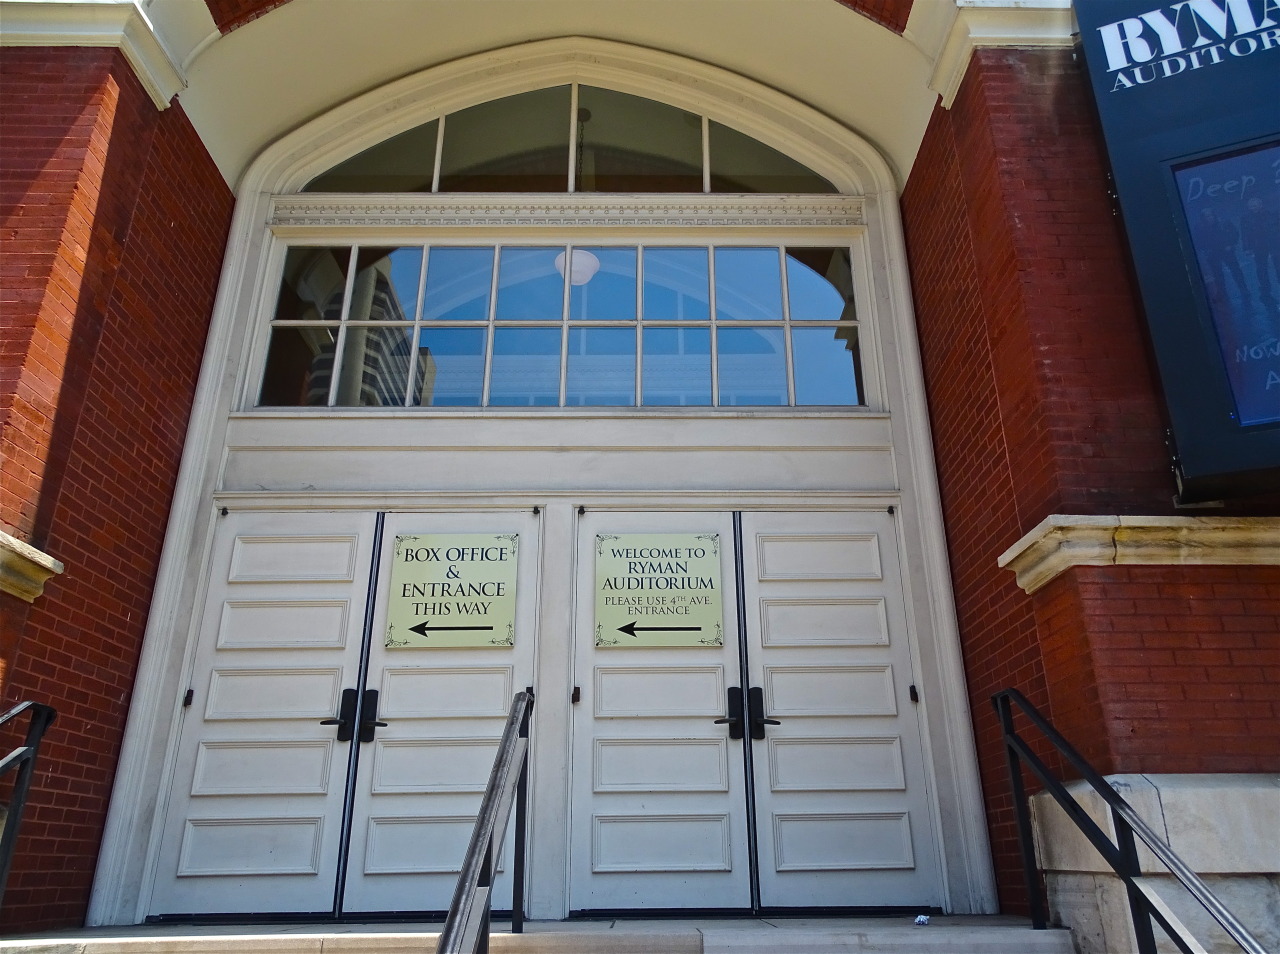 The Mother Church of Bluegrass
(Front doors to the Ryman Auditorium / Nashville, Tennessee / Julie Cook / 2015)